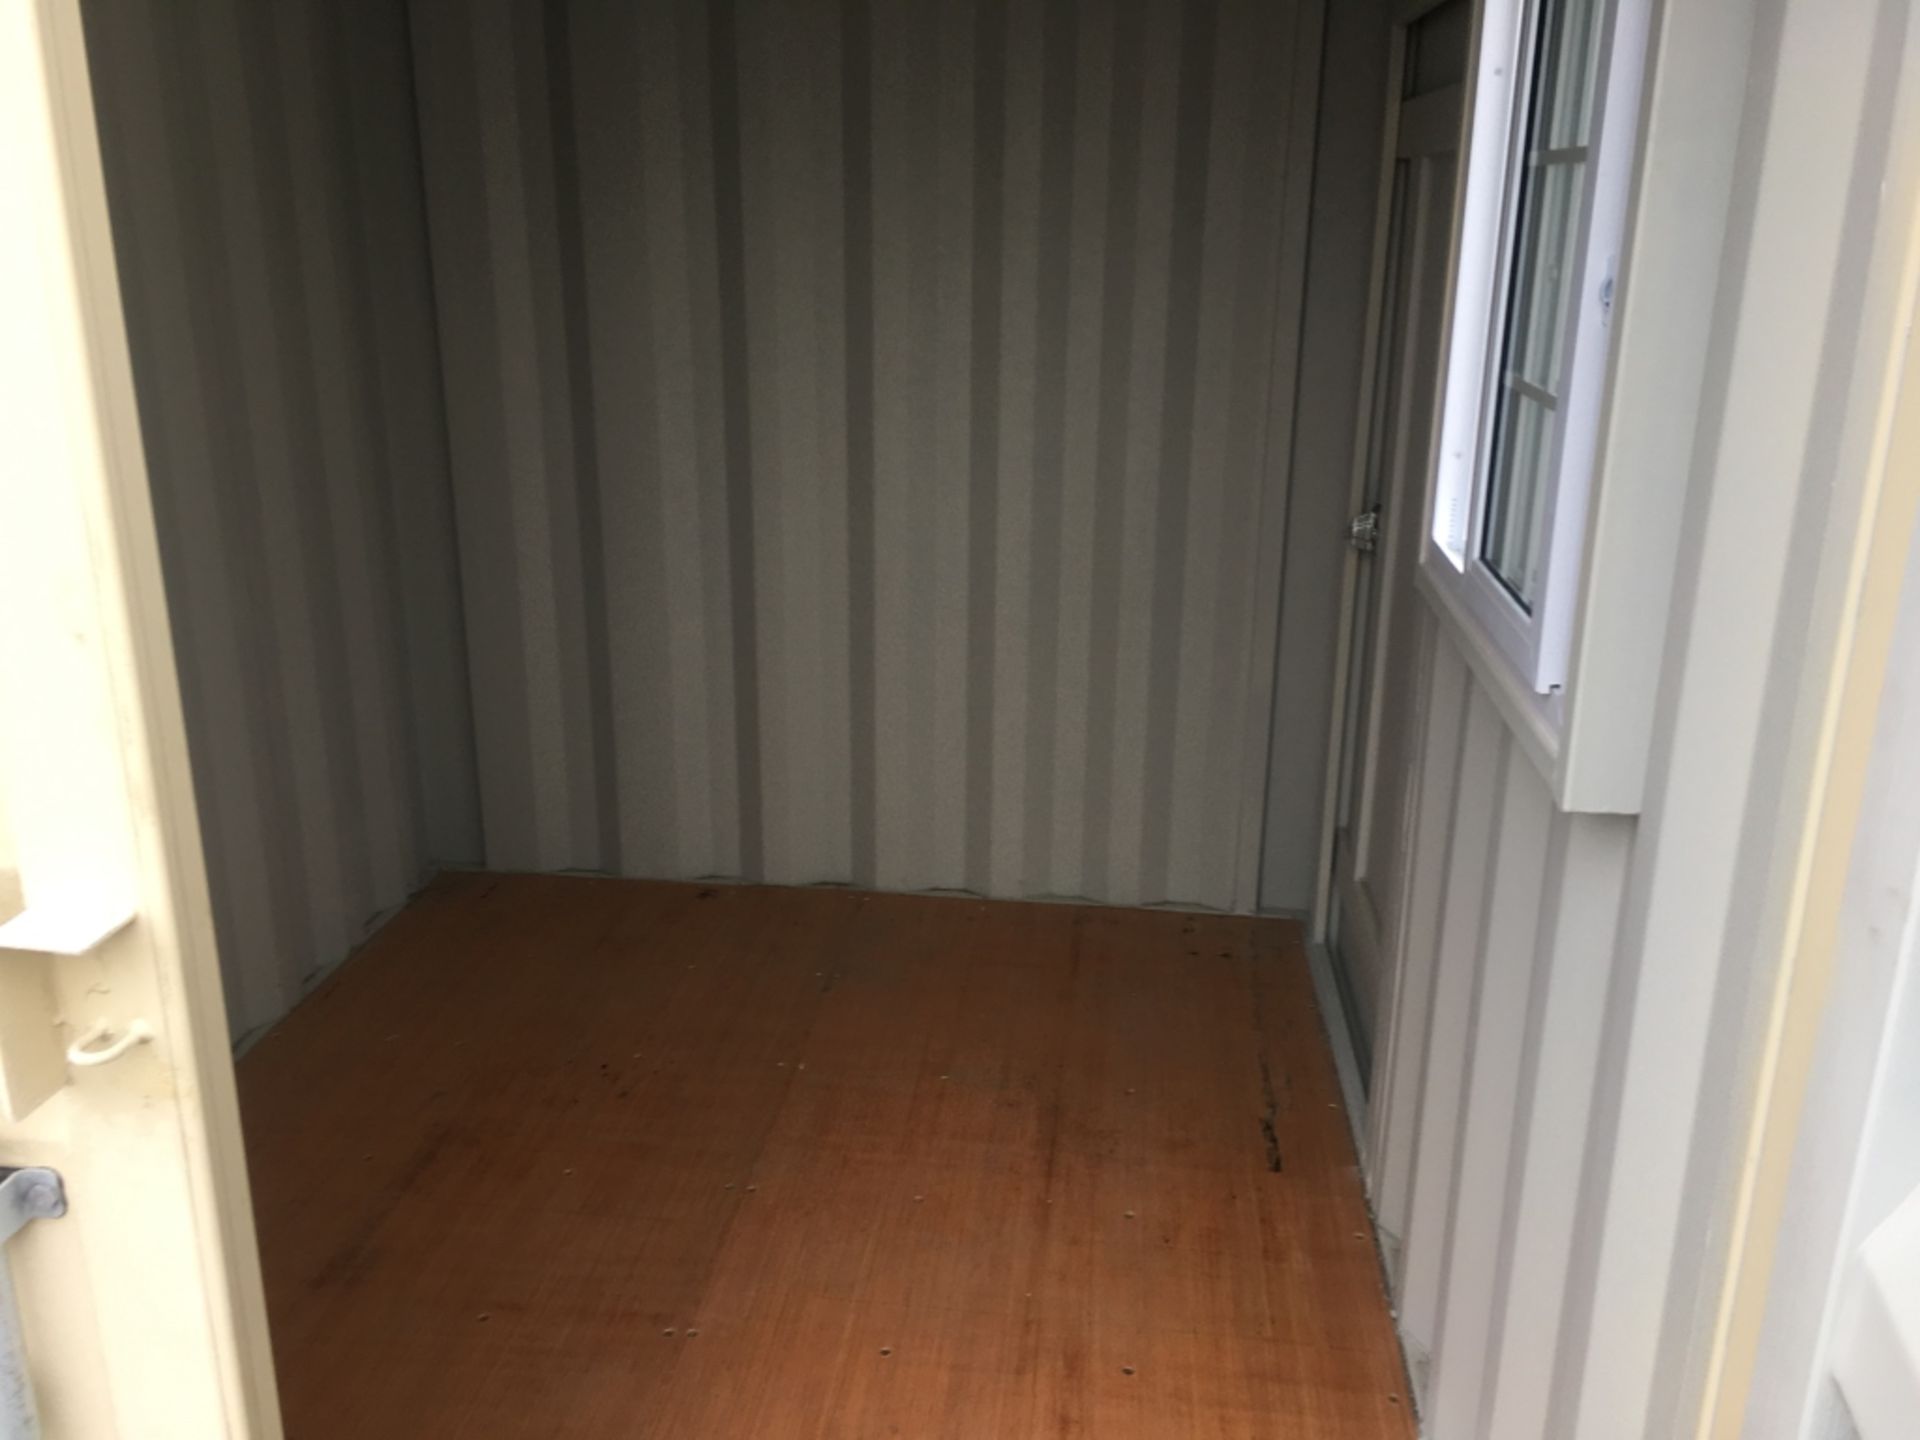 2020 9' Shipping Container - Image 5 of 5